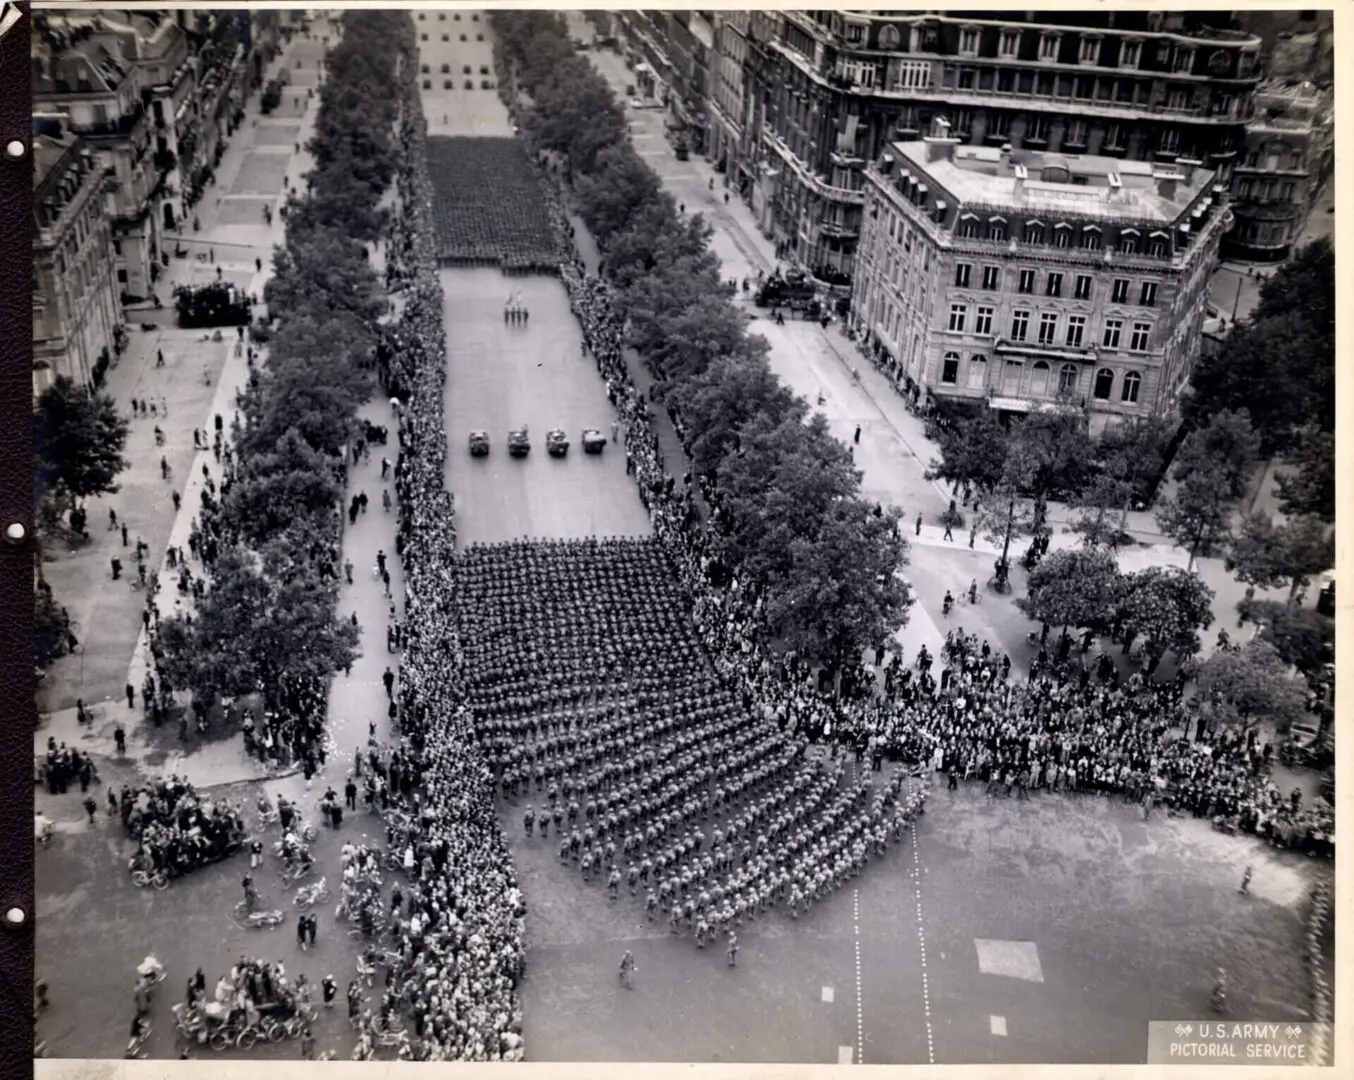 Aerial view of a victory parade after the war